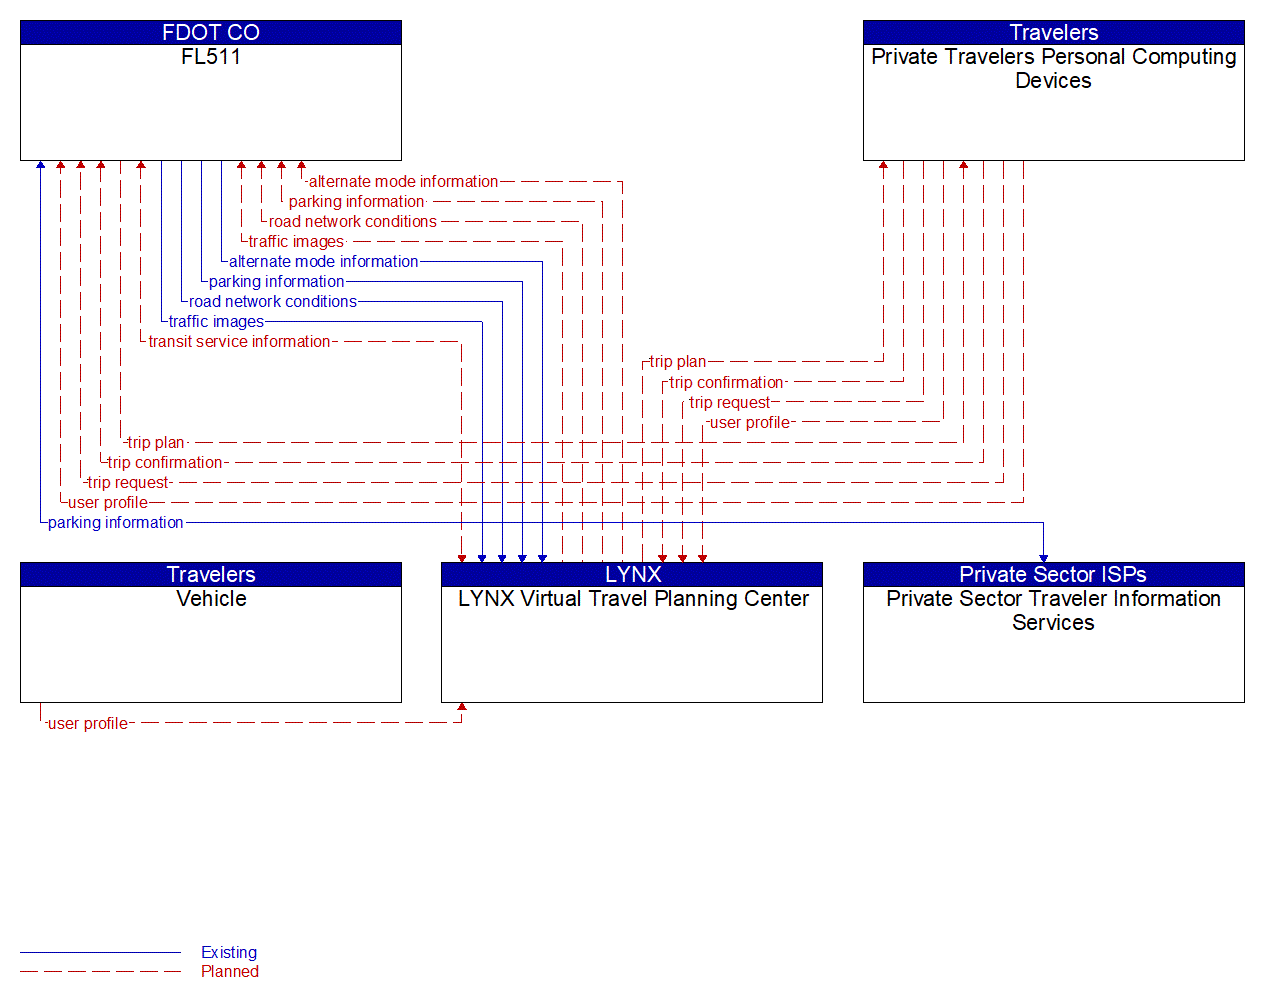 Service Graphic: Infrastructure-Provided Trip Planning and Route Guidance (FL511)